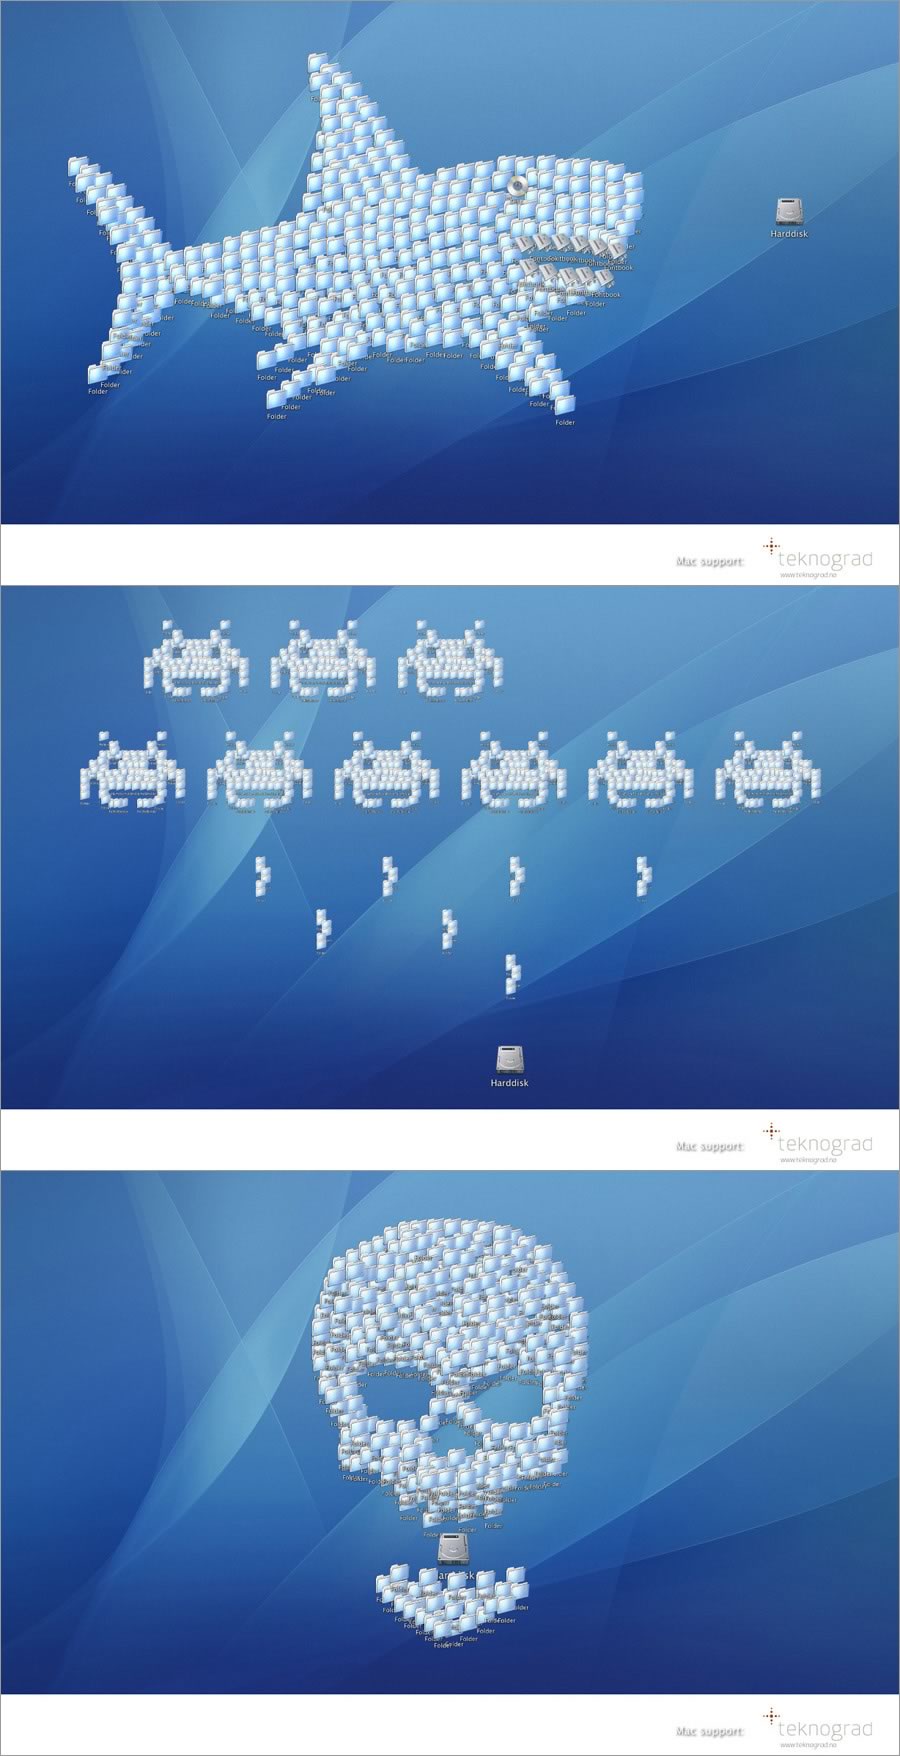 Teknograd Mac Support ad featuring desktop icons arranged to form images